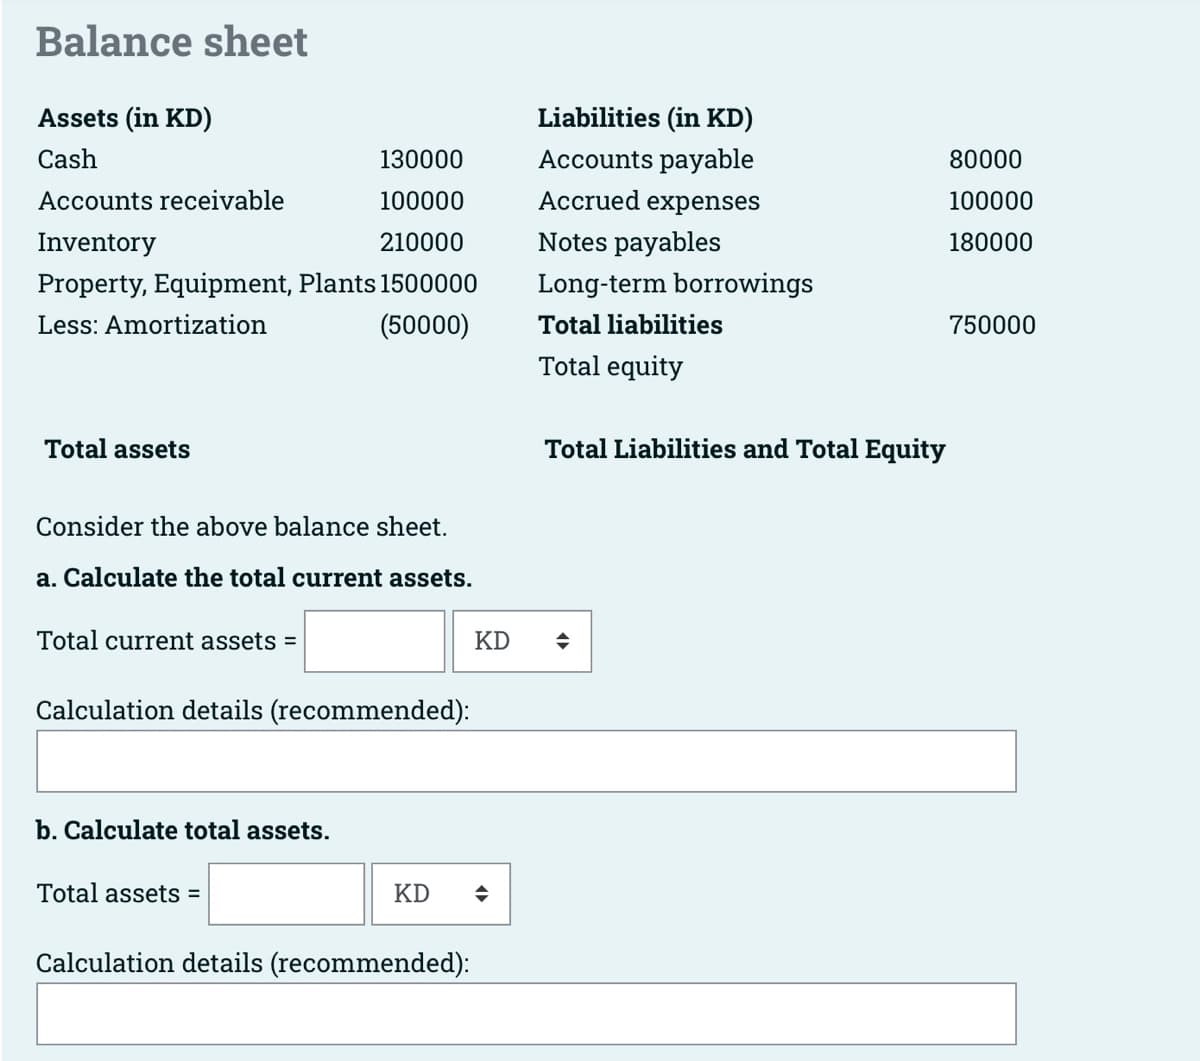 Balance sheet
Assets (in KD)
Cash
130000
Accounts receivable
100000
Inventory
210000
Property, Equipment, Plants 1500000
Less: Amortization
(50000)
Total assets
Consider the above balance sheet.
a. Calculate the total current assets.
Total current assets =
Calculation details (recommended):
b. Calculate total assets.
Total assets =
KD
Calculation details (recommended):
KD
Liabilities (in KD)
Accounts payable
Accrued expenses
Notes payables
Long-term borrowings
Total liabilities
Total equity
Total Liabilities and Total Equity
◆
80000
100000
180000
750000